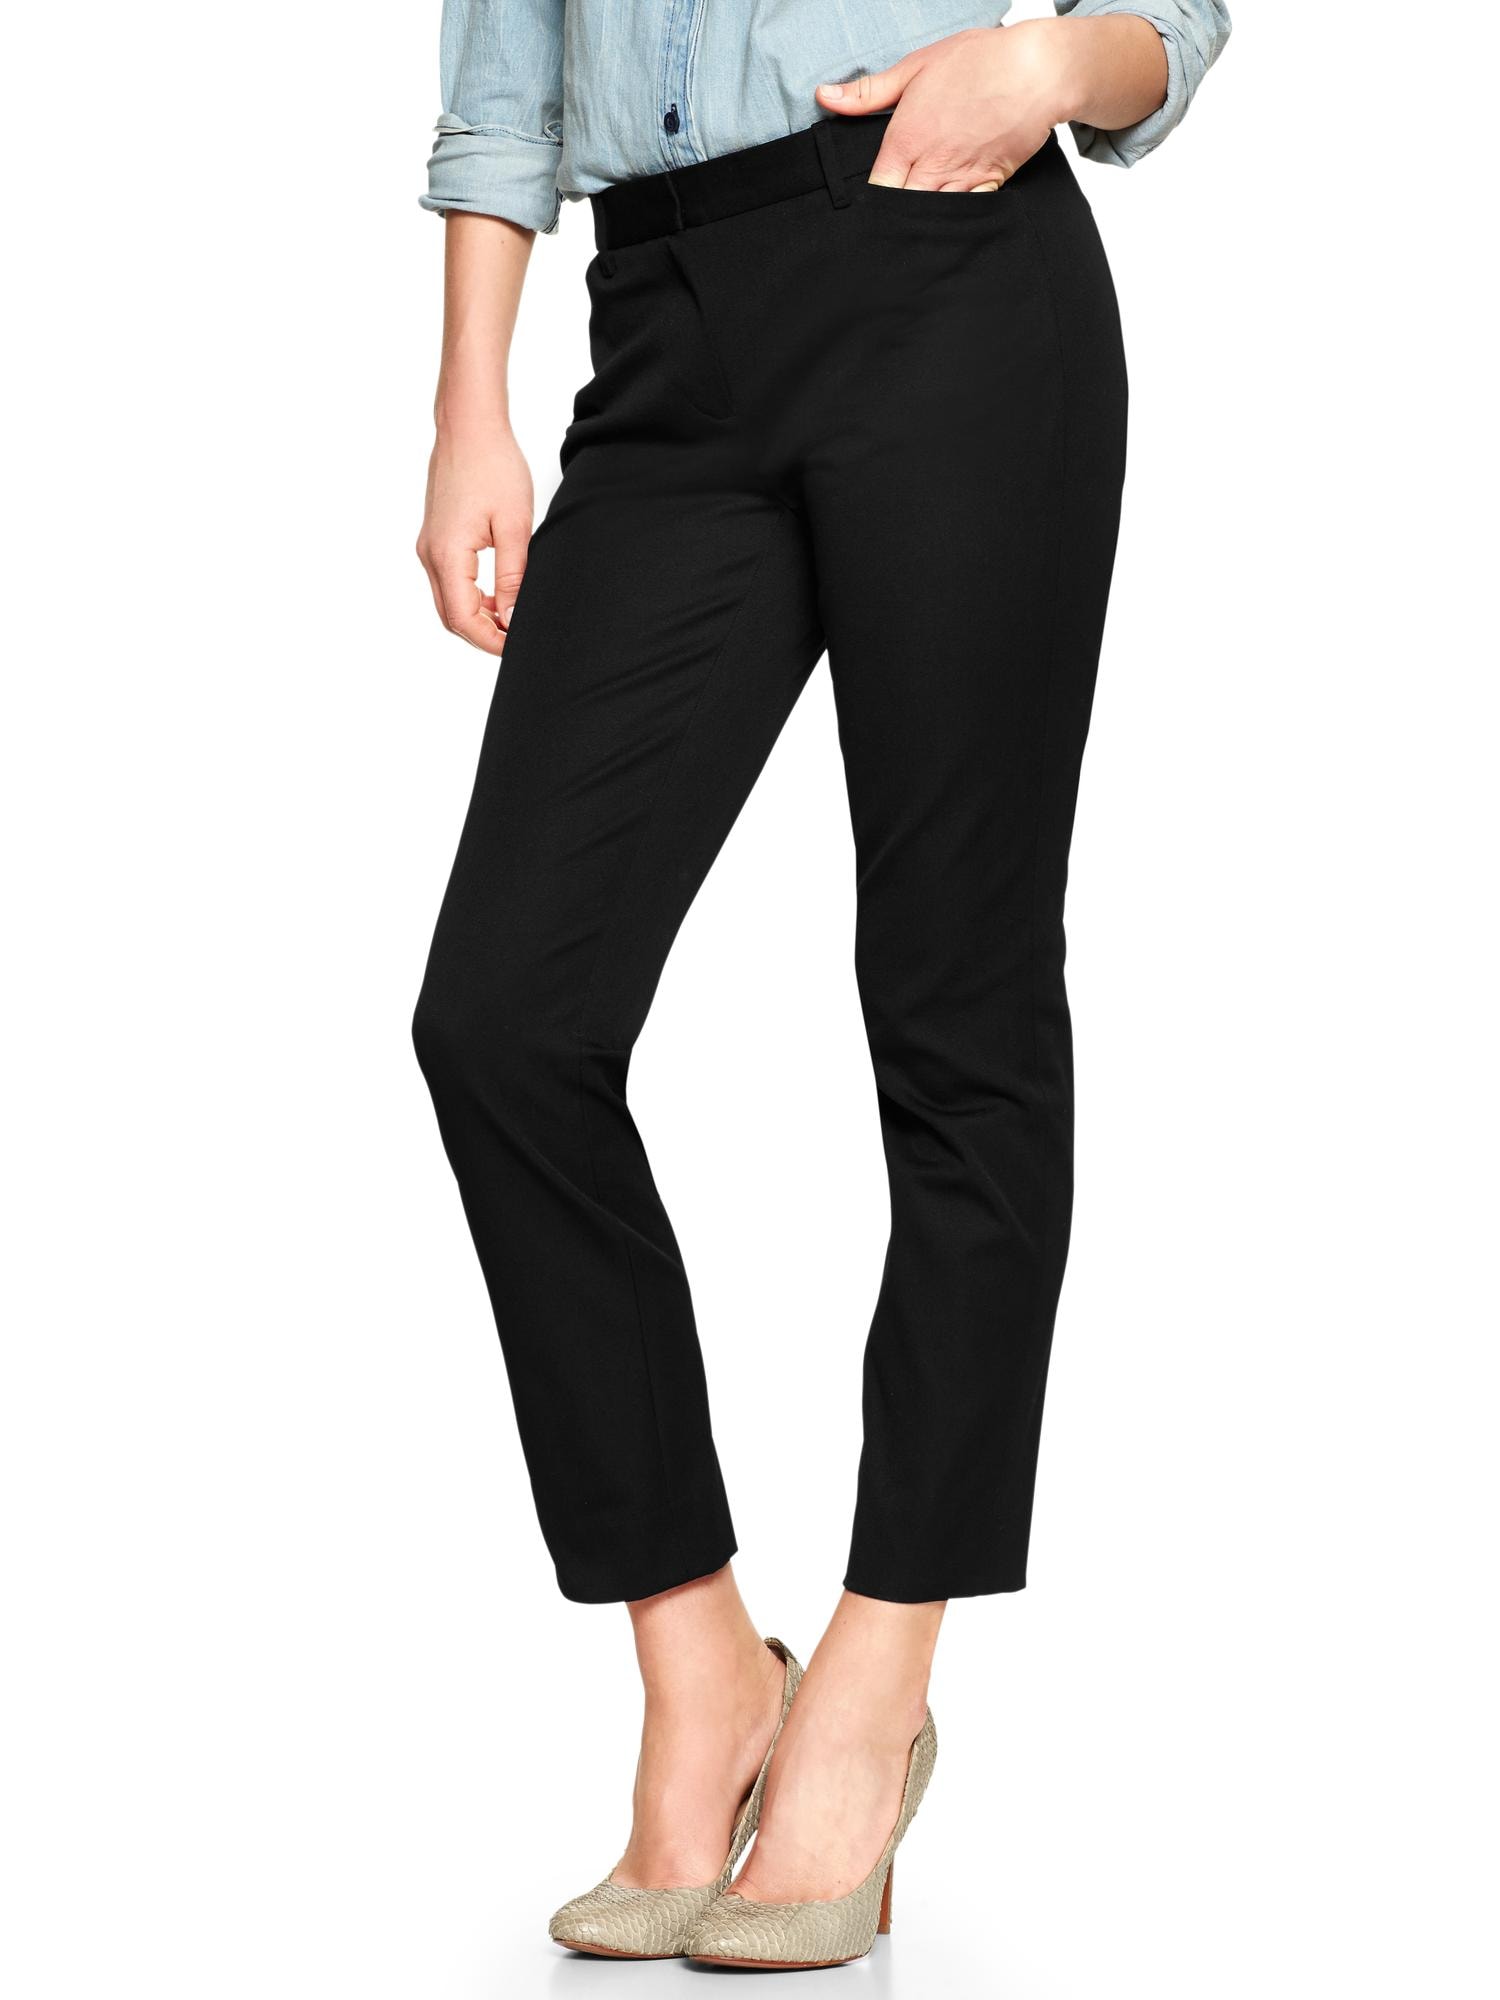 THE SLOAN PANT - Styled Snapshots